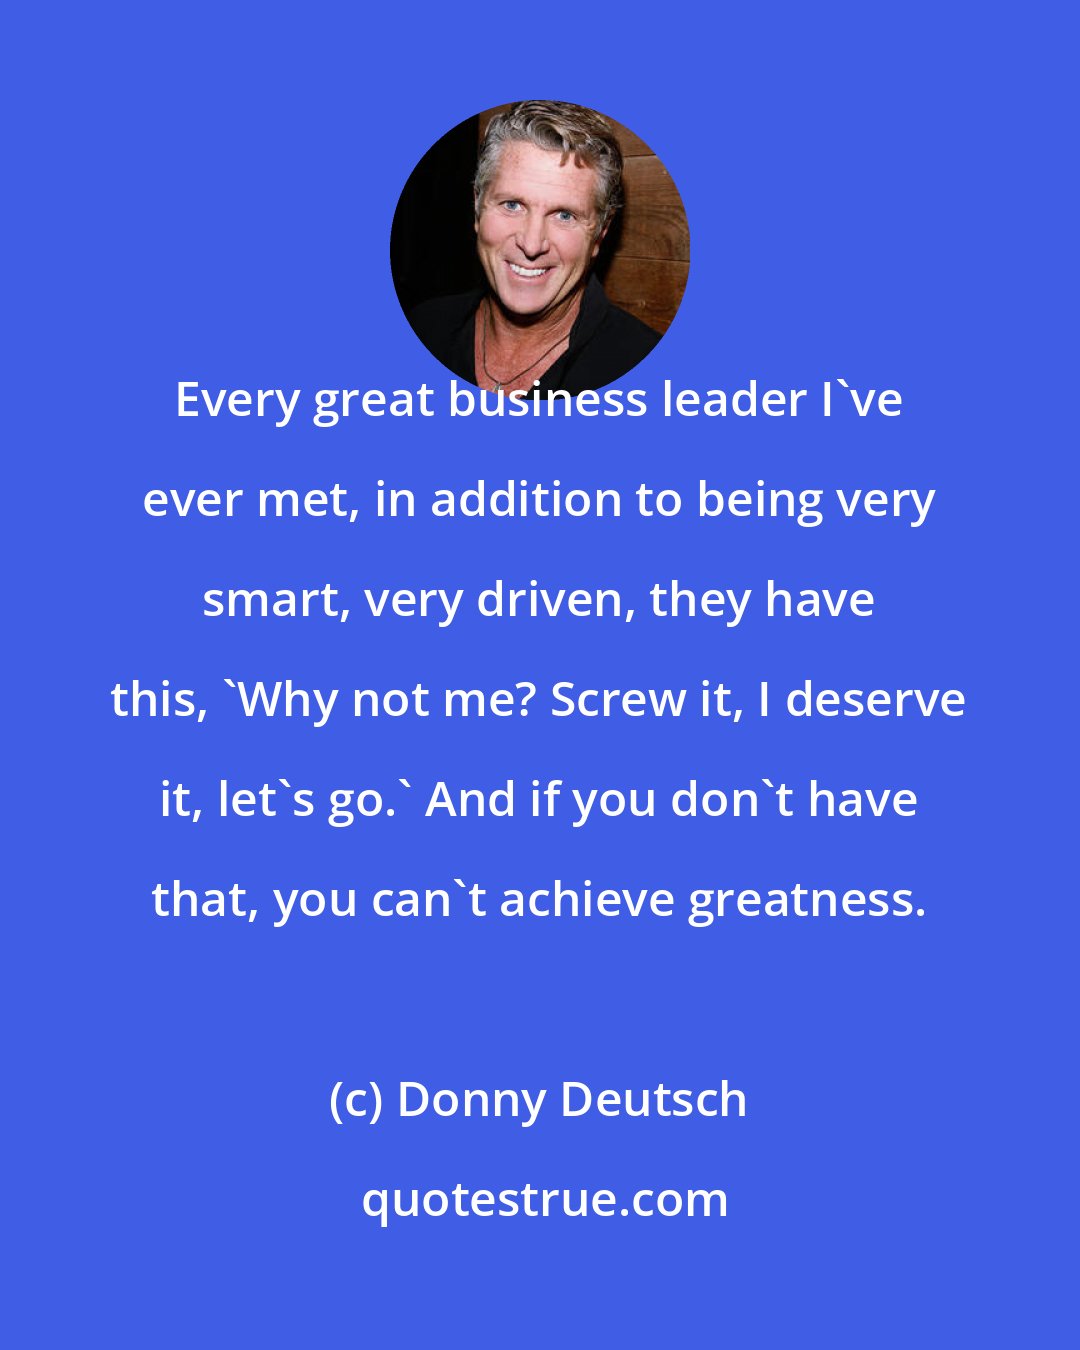 Donny Deutsch: Every great business leader I've ever met, in addition to being very smart, very driven, they have this, 'Why not me? Screw it, I deserve it, let's go.' And if you don't have that, you can't achieve greatness.